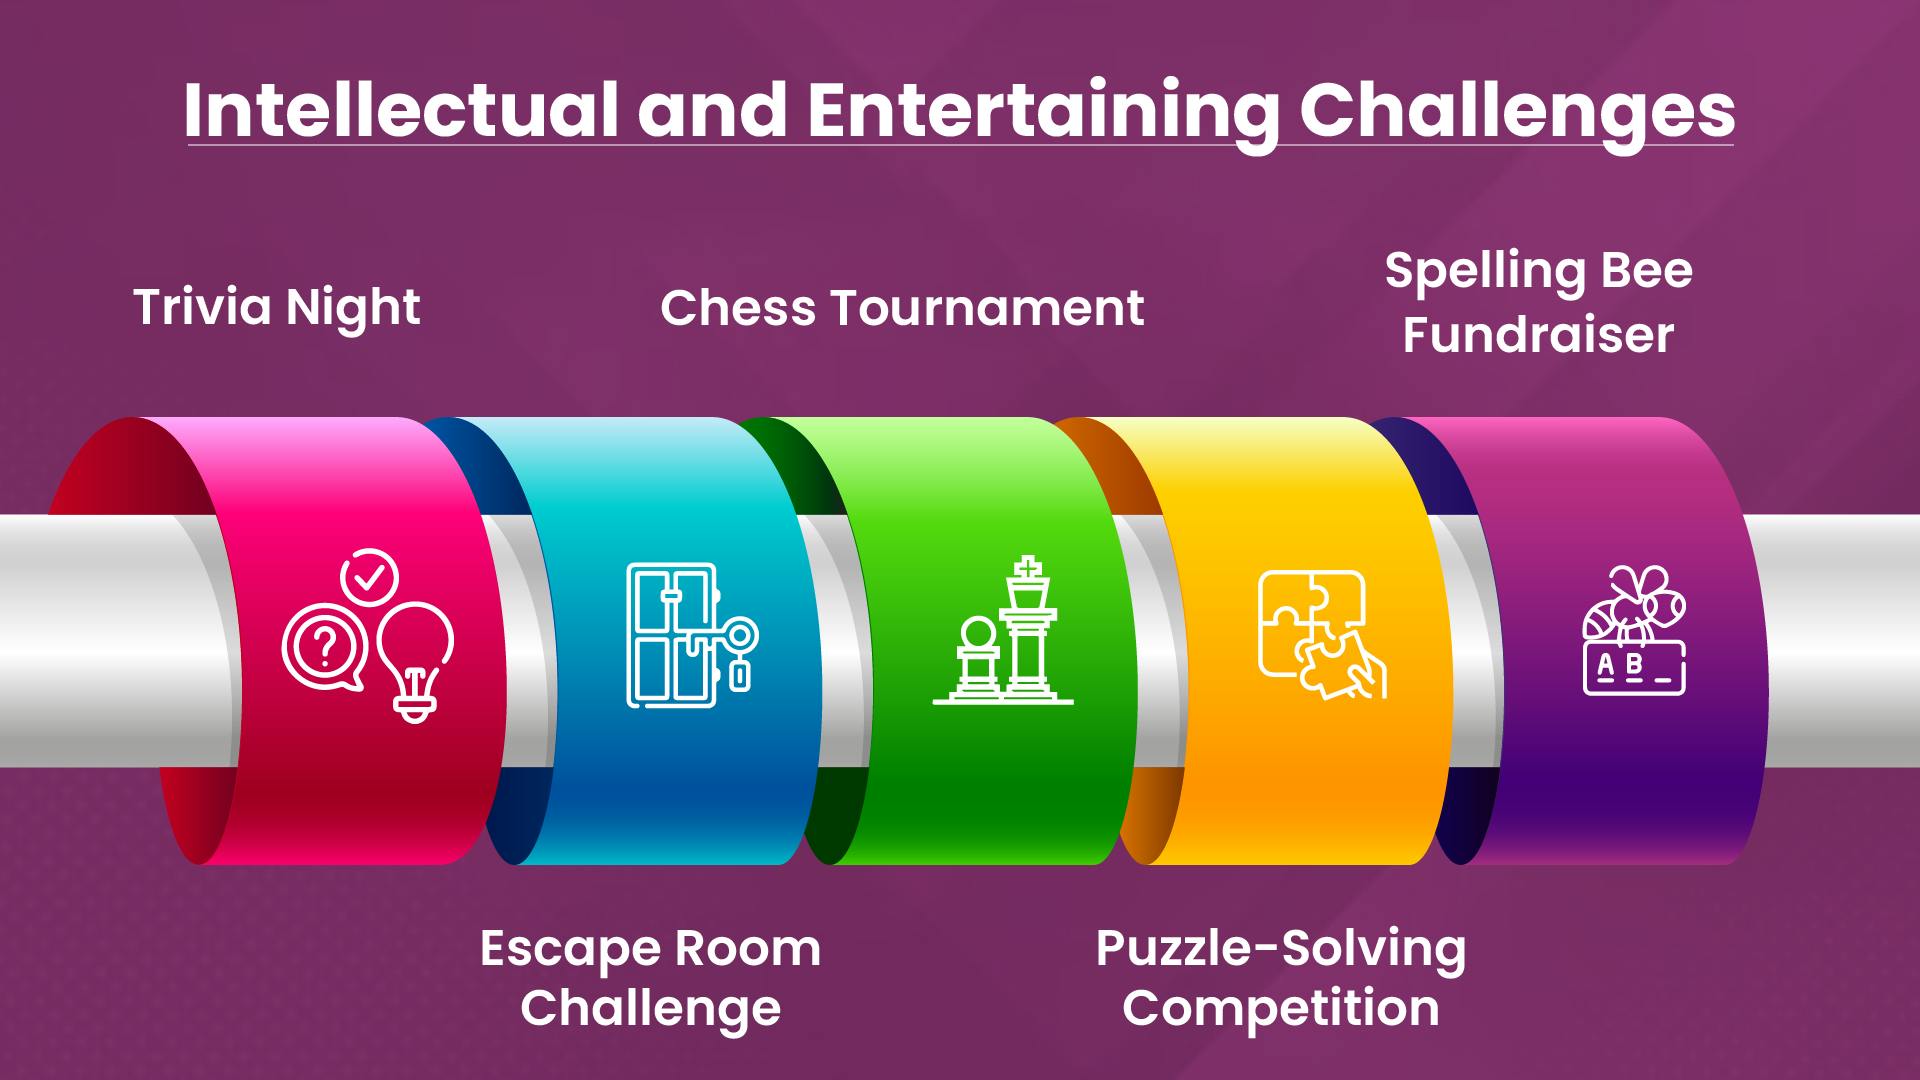 Category 4 - Intellectual and entertaining challenges